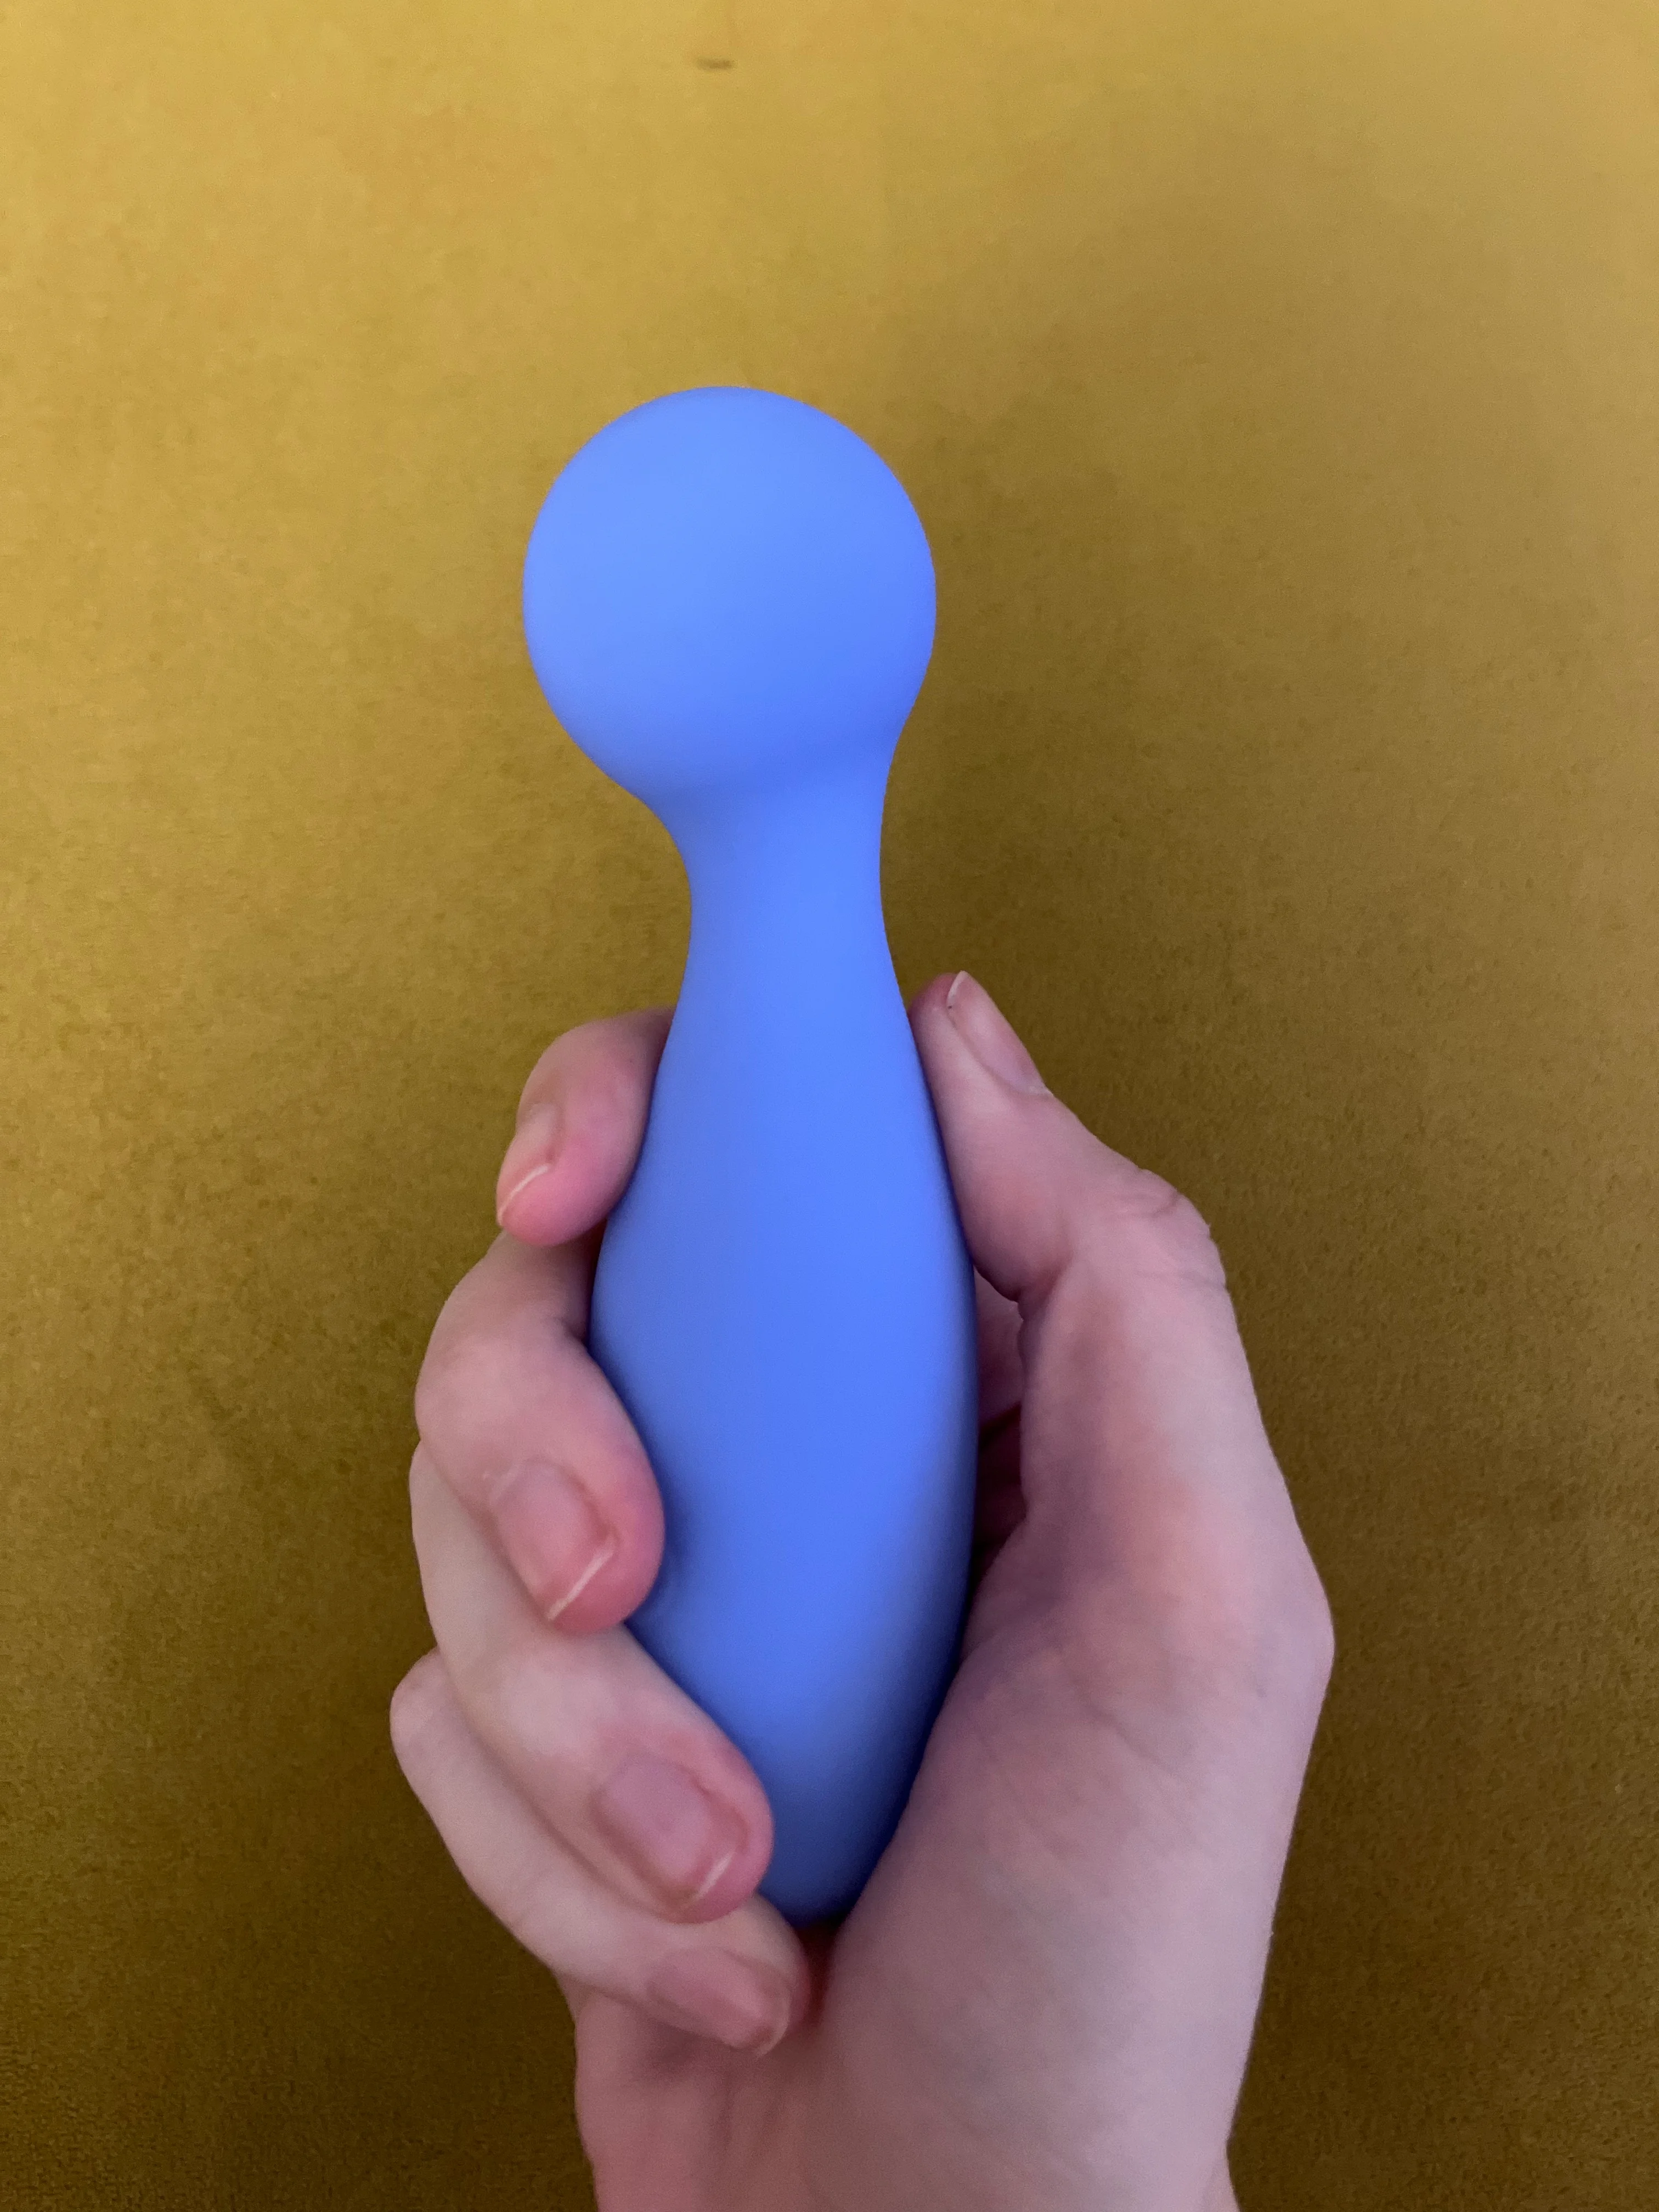 amiel cabral recommends Plus One Personal Massager